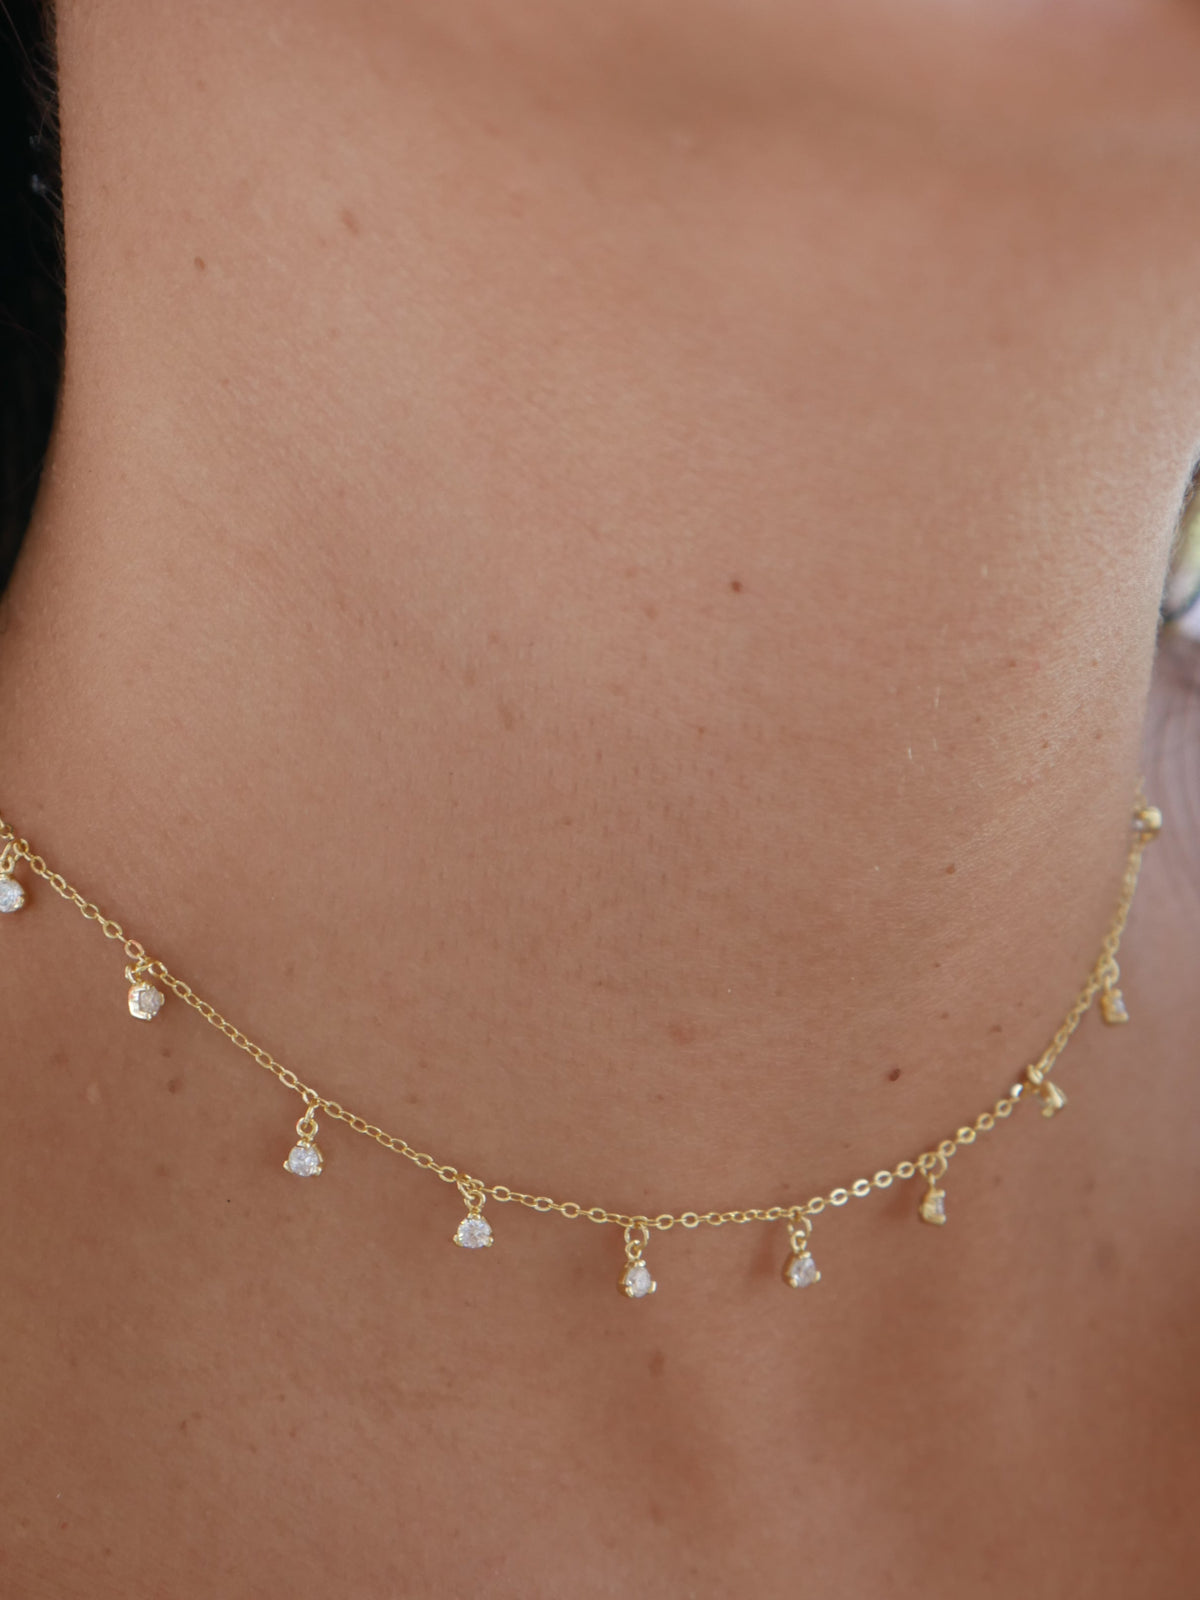 Little Bars Y Necklace, 14k gold plated .925 Sterling Silver Hypoallergenic Lariat Necklace